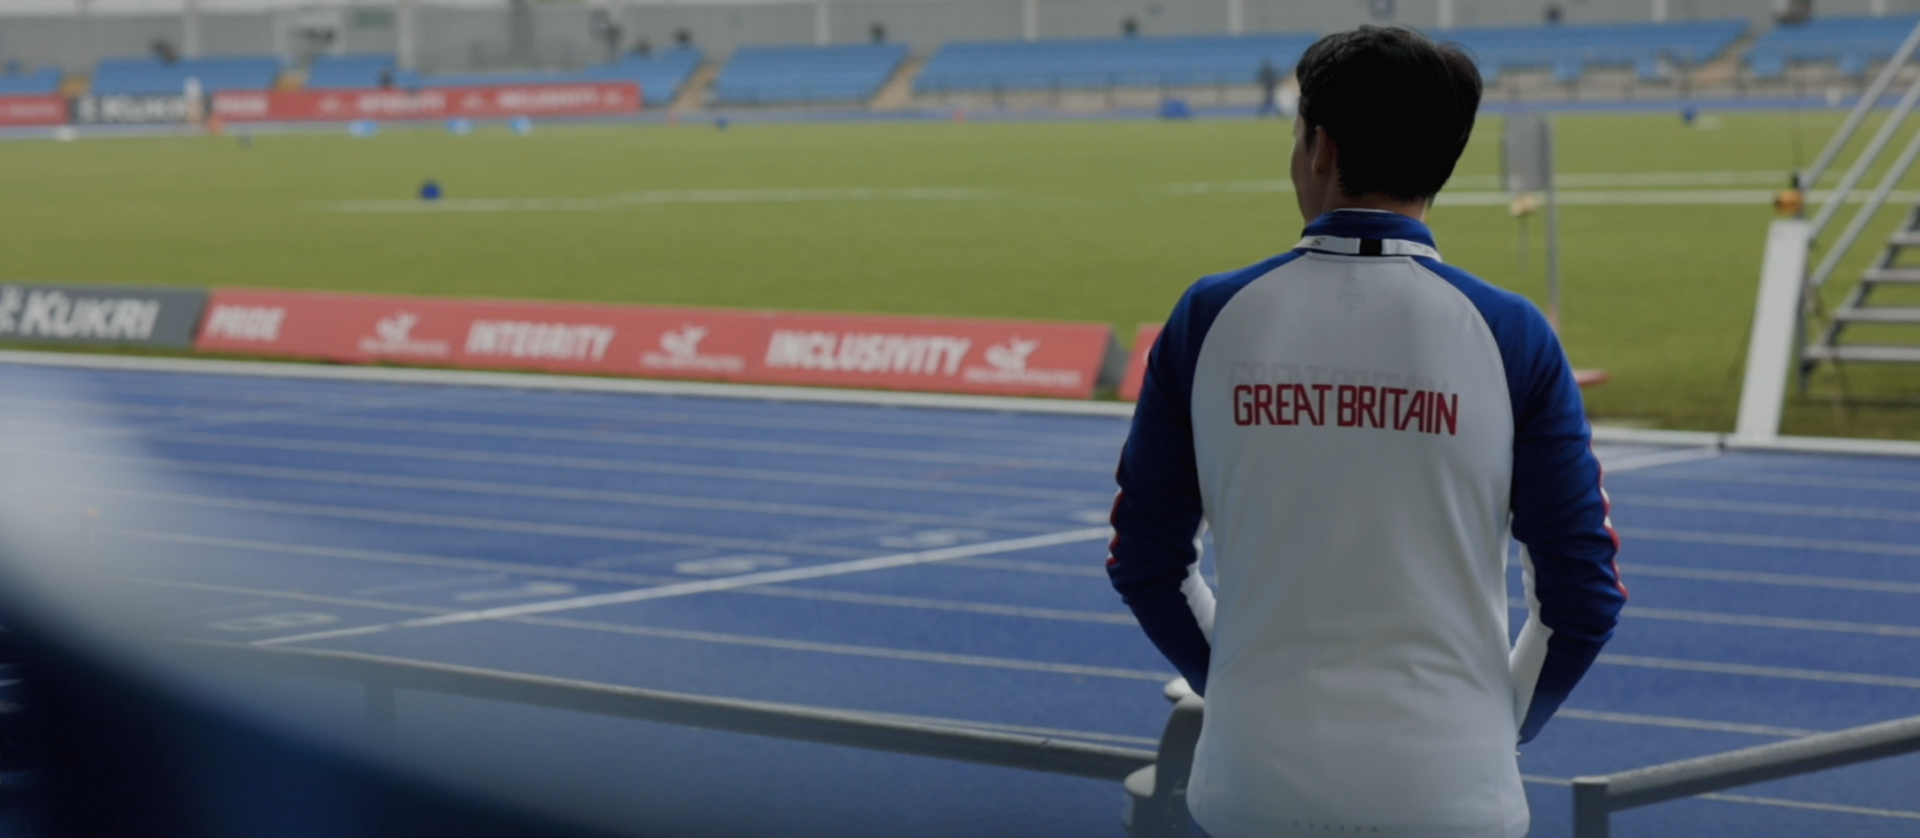 Man stares out at pitch at England Athletics event